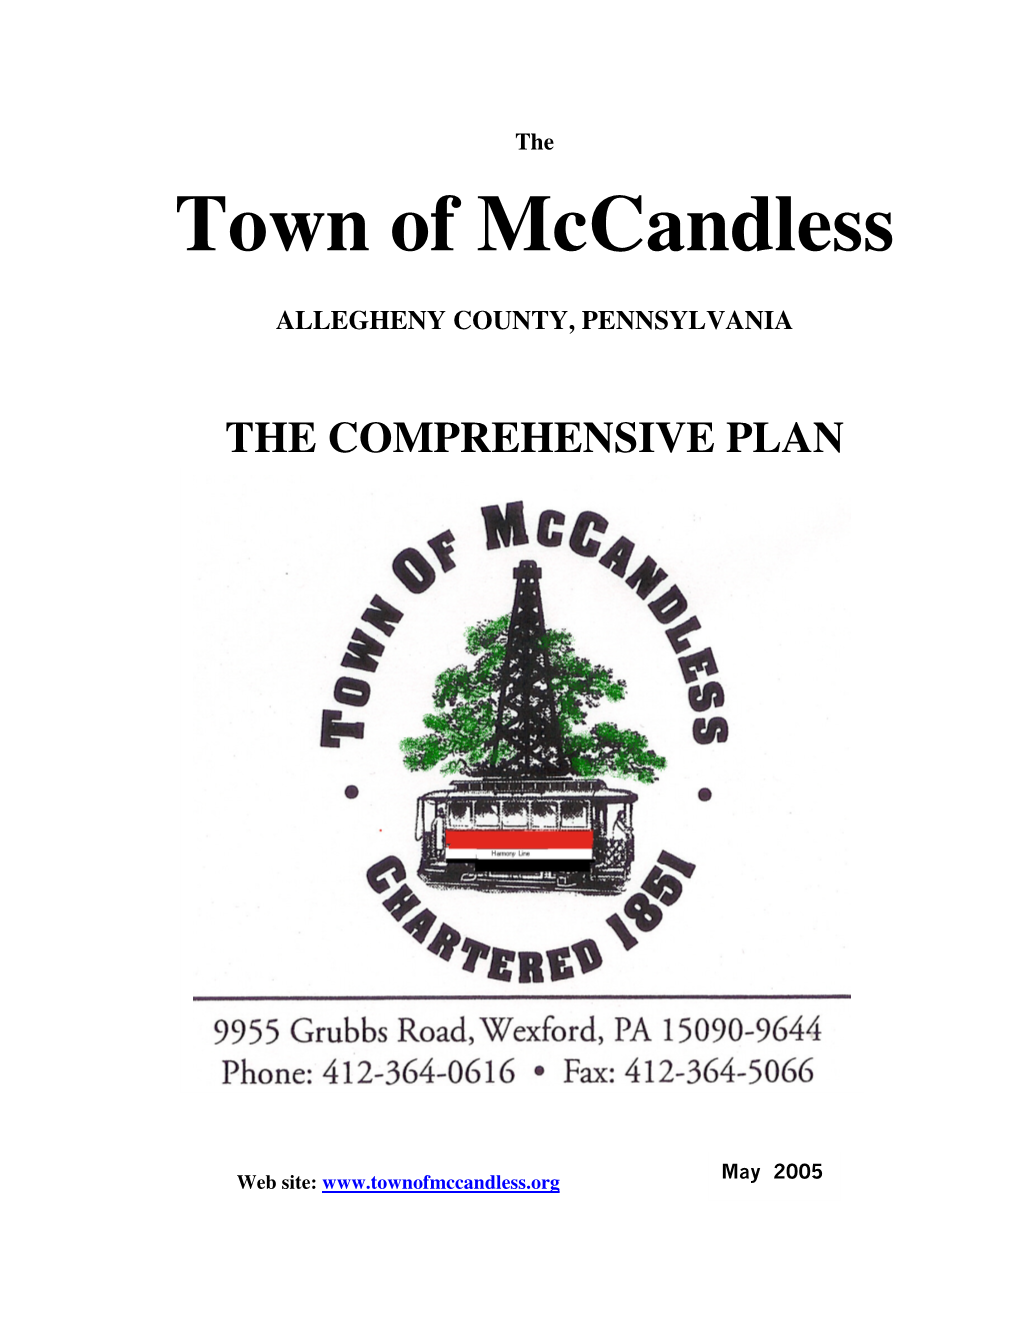 Town of Mccandless ALLEGHENY COUNTY, PENNSYLVANIA THE